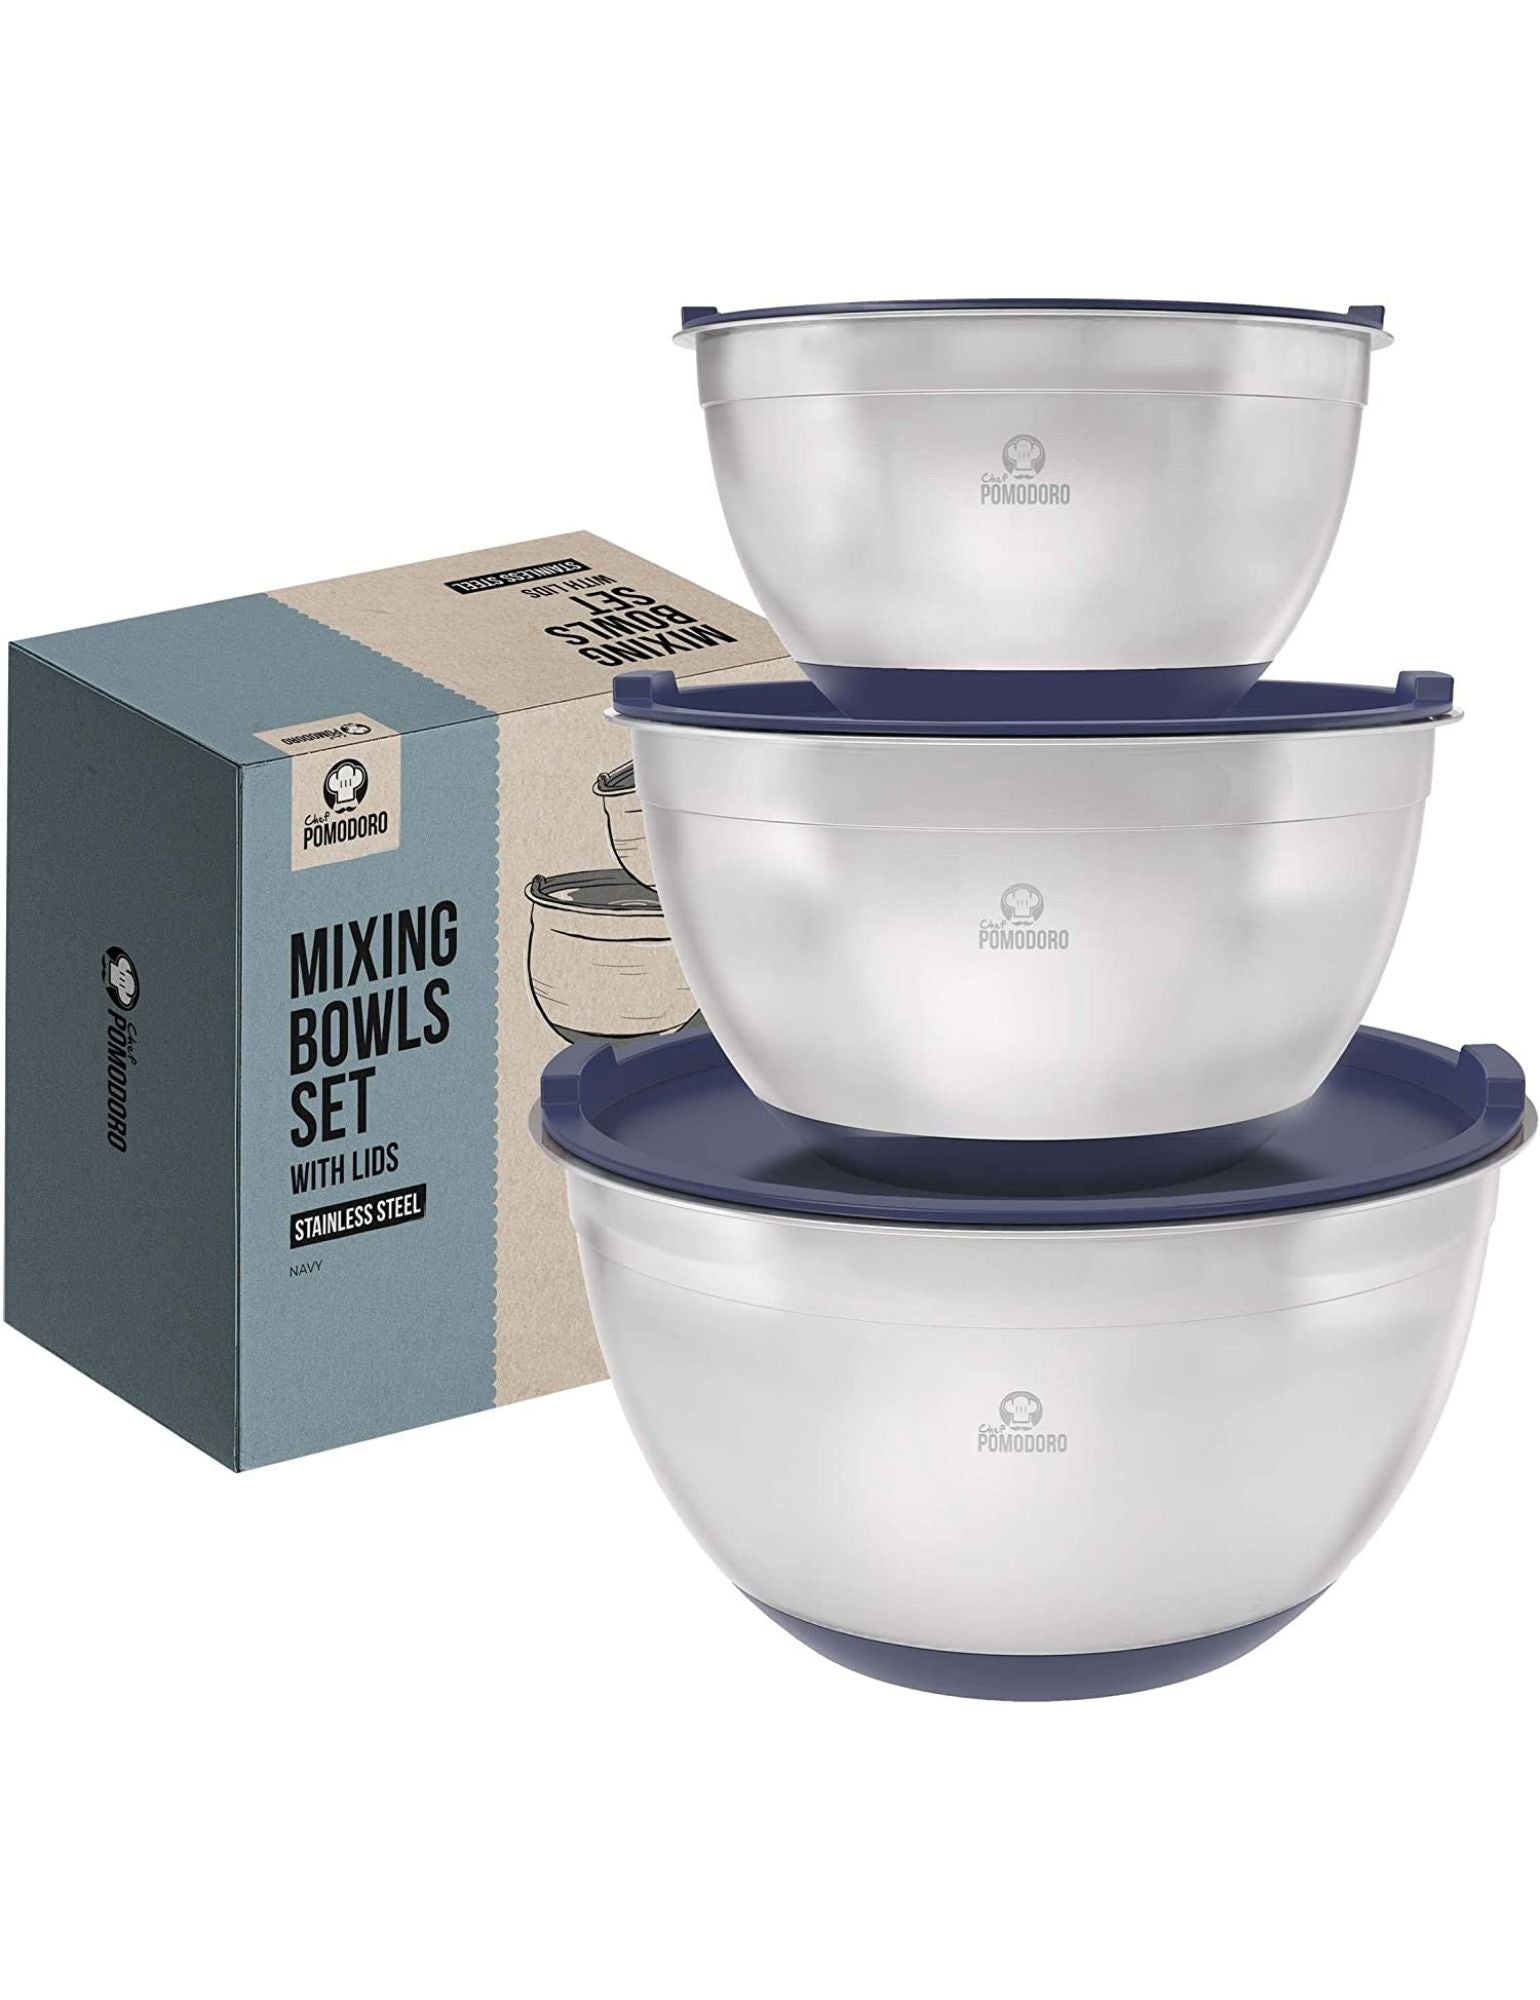 Large Deep Stainless Steel Mixing Bowls Set with Lids, Non Slip